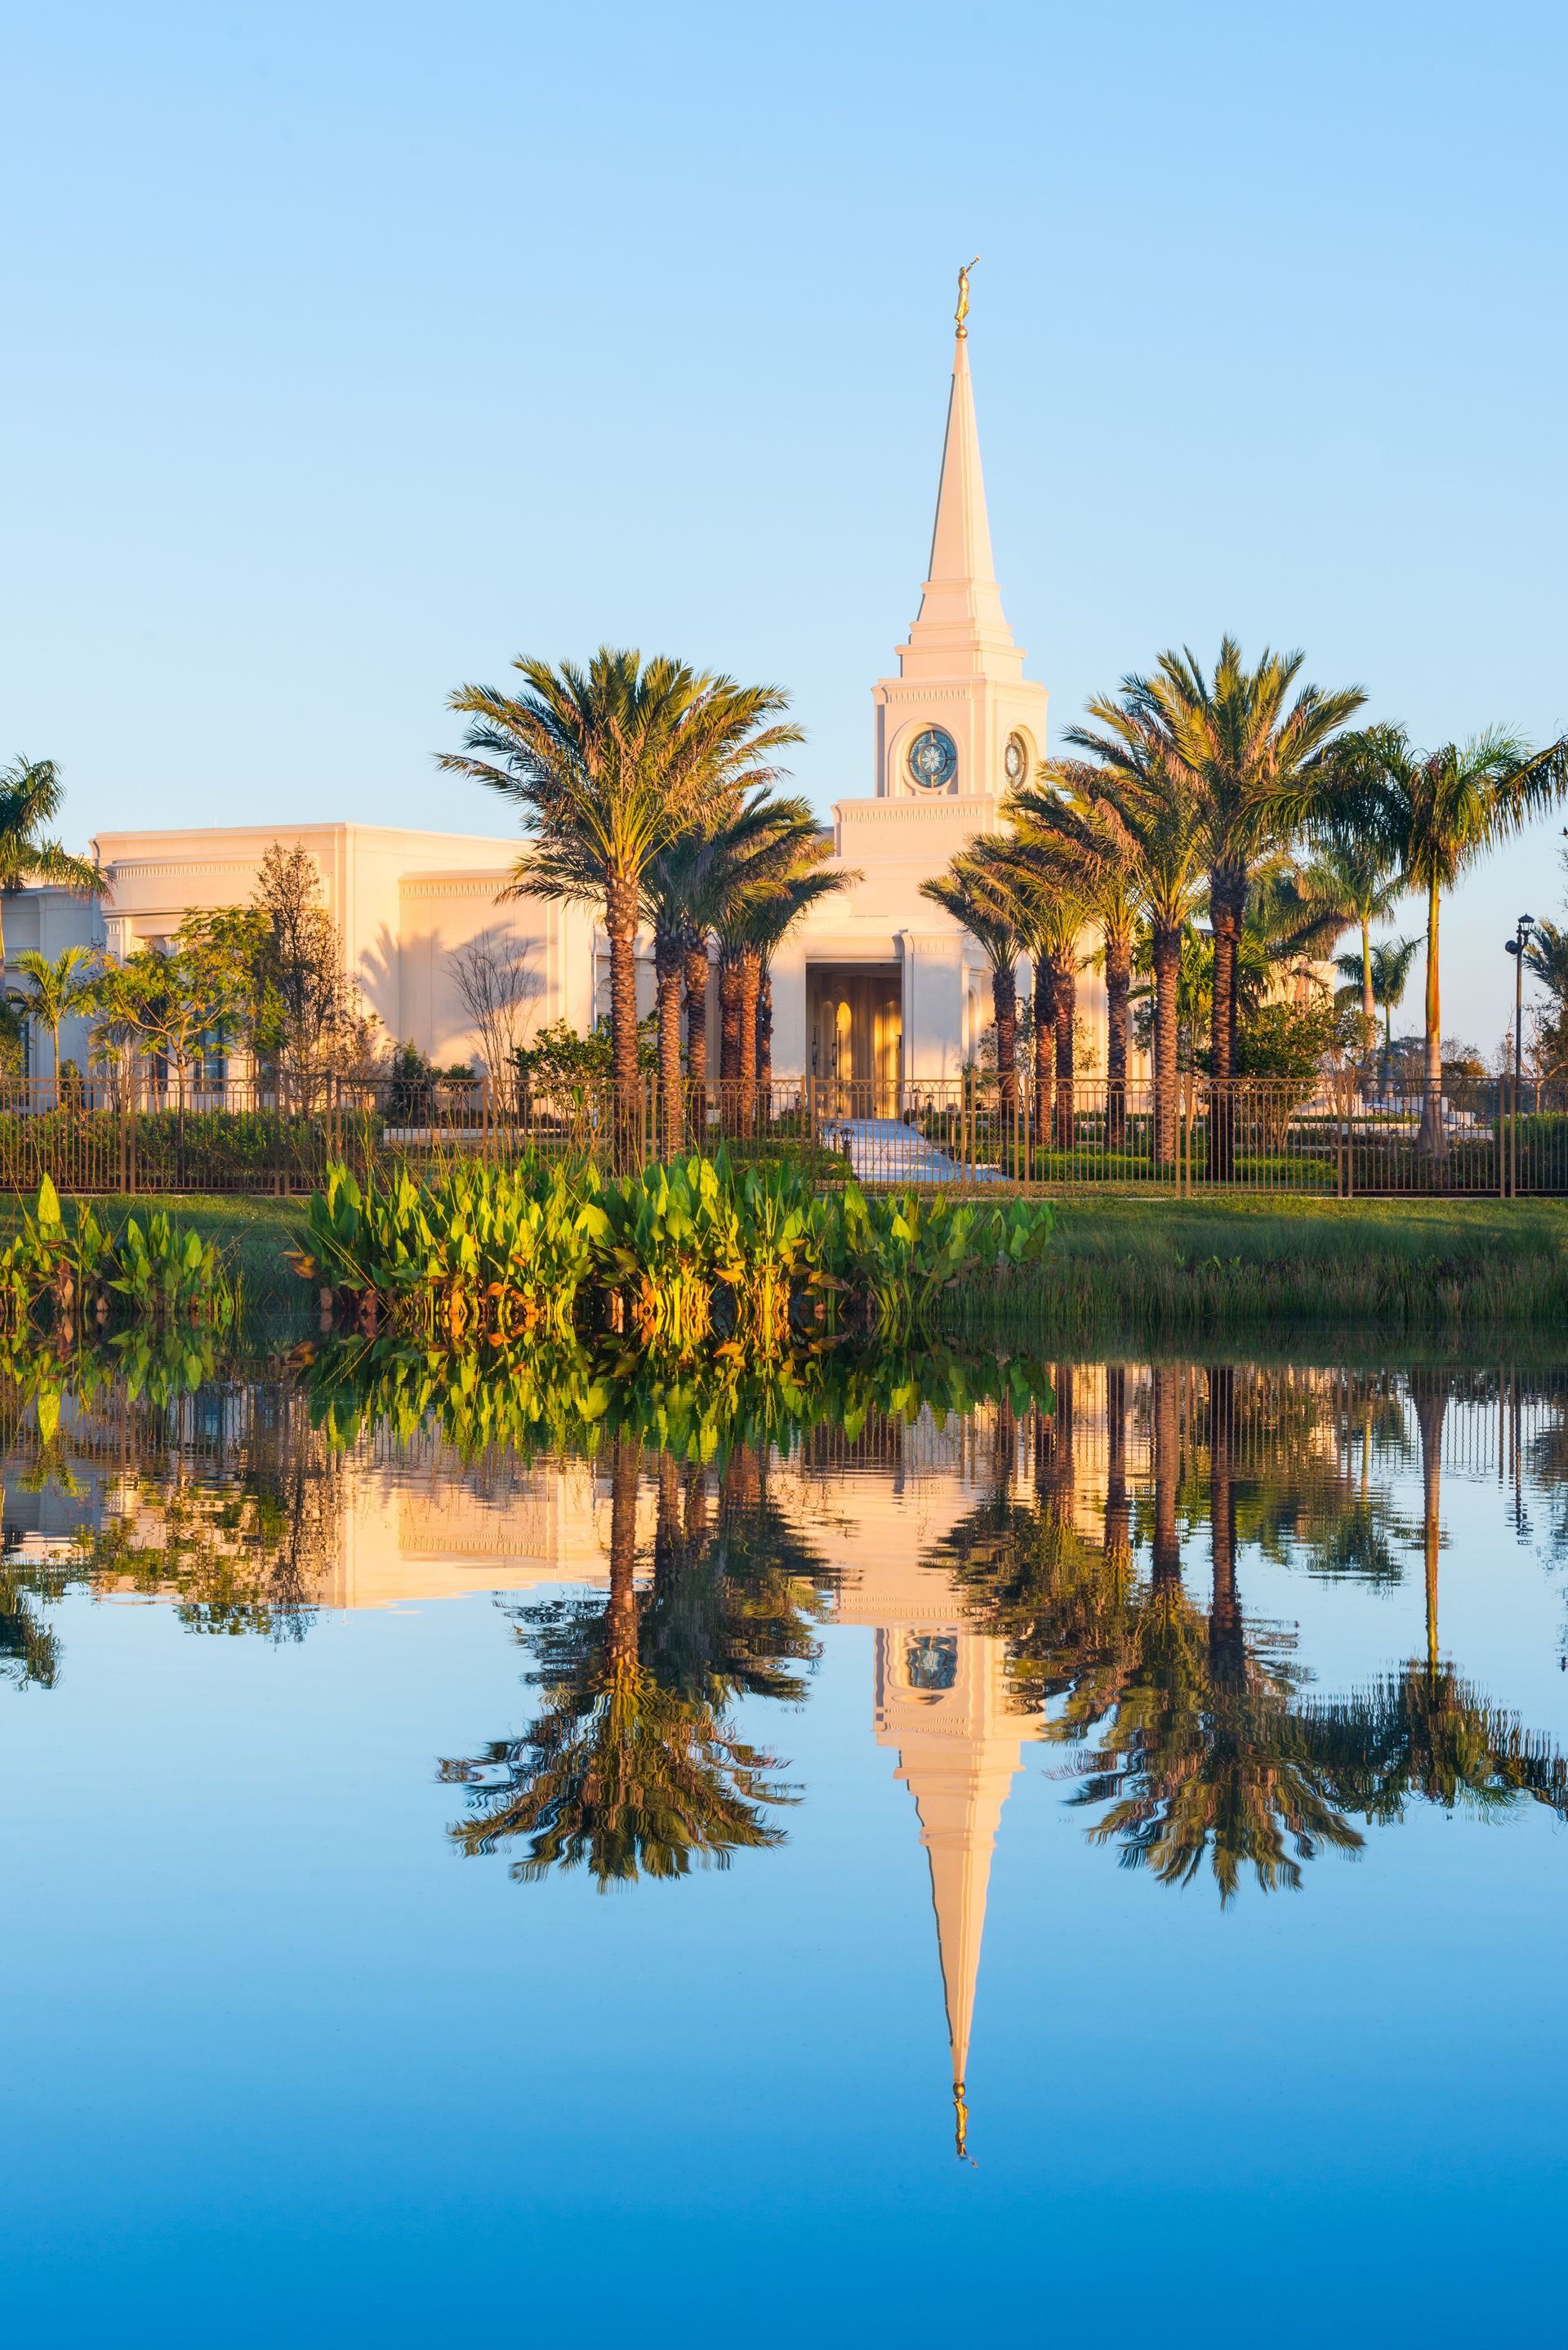 An exterior view of the Fort Lauderdale Florida Temple and grounds in the late evening.